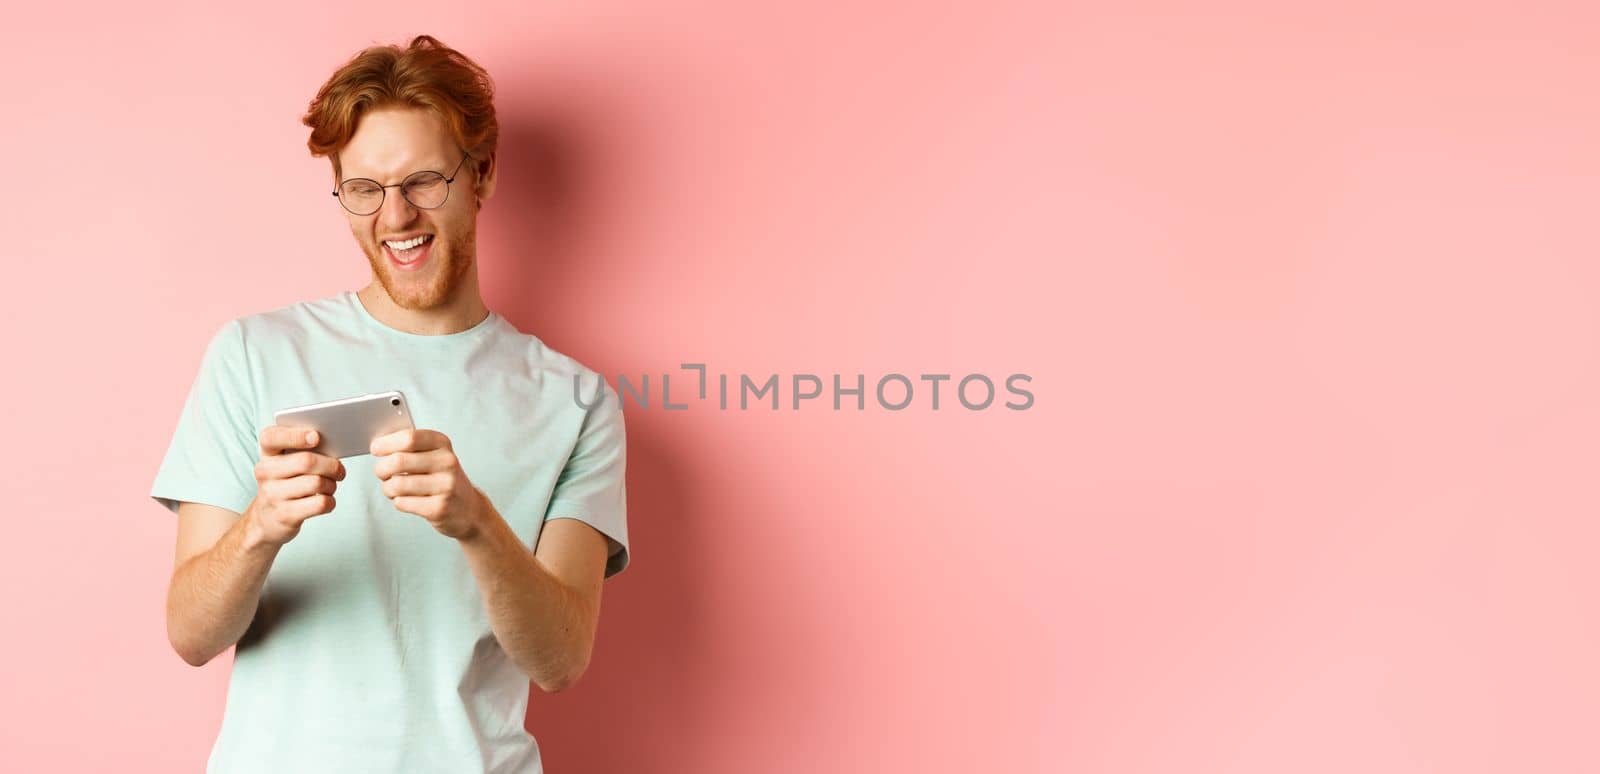 Happy young man with red messy haircut, wearing glasses, playing video game on smartphone and having fun, looking at mobile screen, standing over pink background.